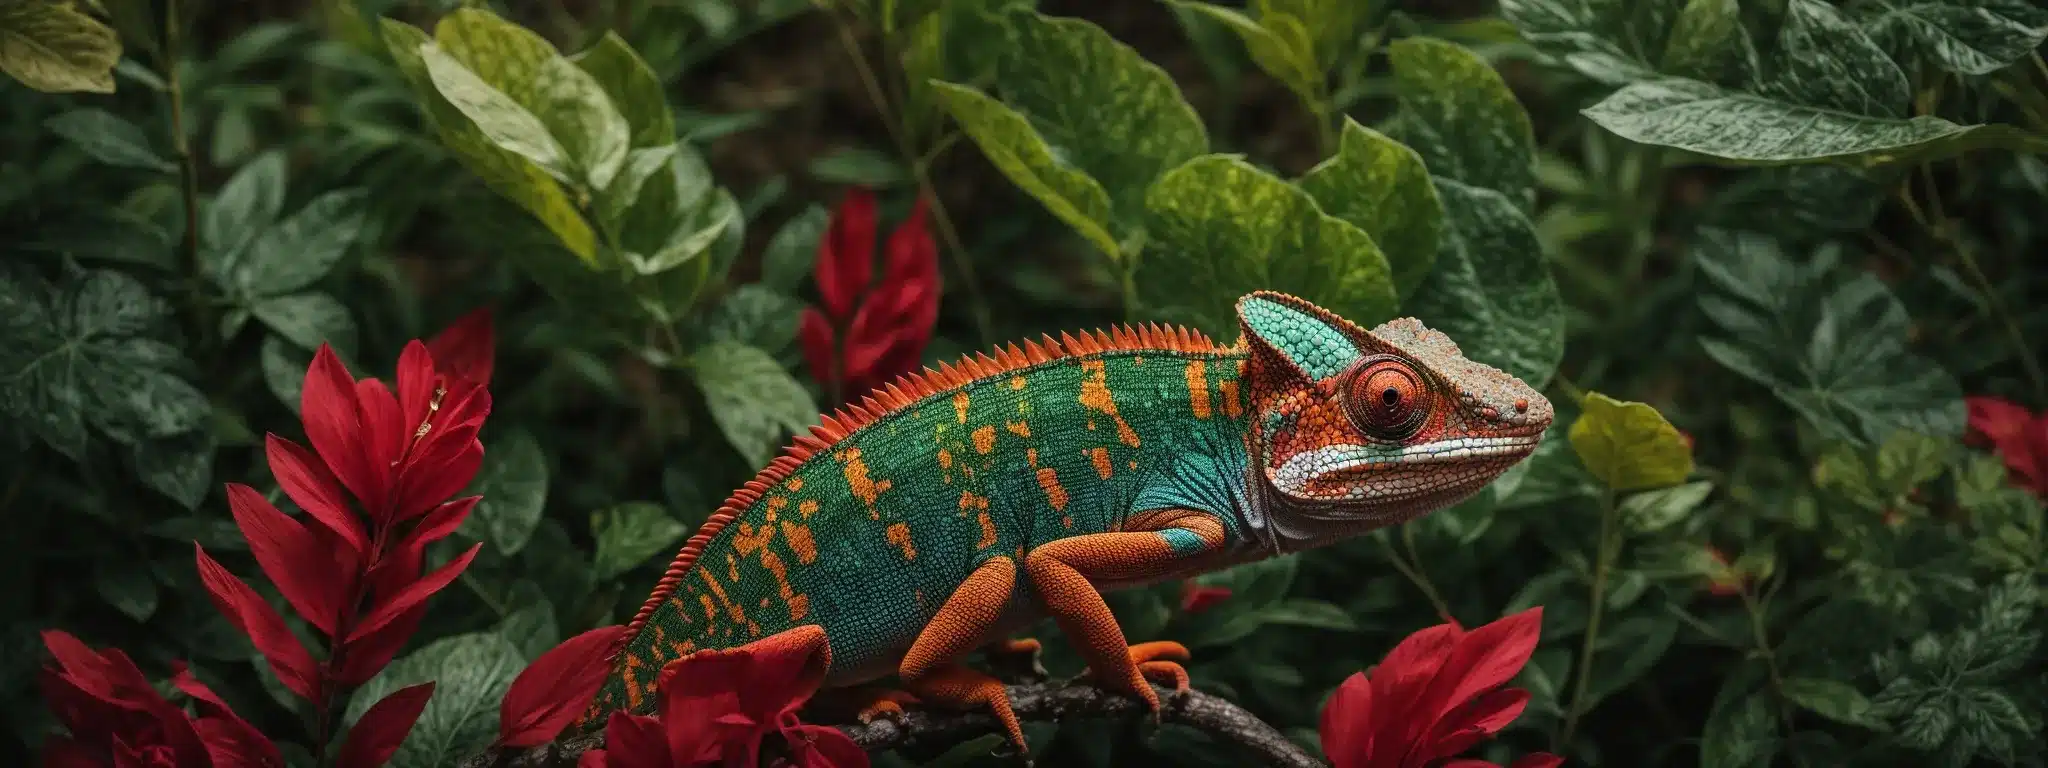 A Chameleon Seamlessly Blends Into A Vibrant Foliage, Symbolizing The Dynamic Adaptability Of A Brand'S Visual Identity Across Different Platforms.